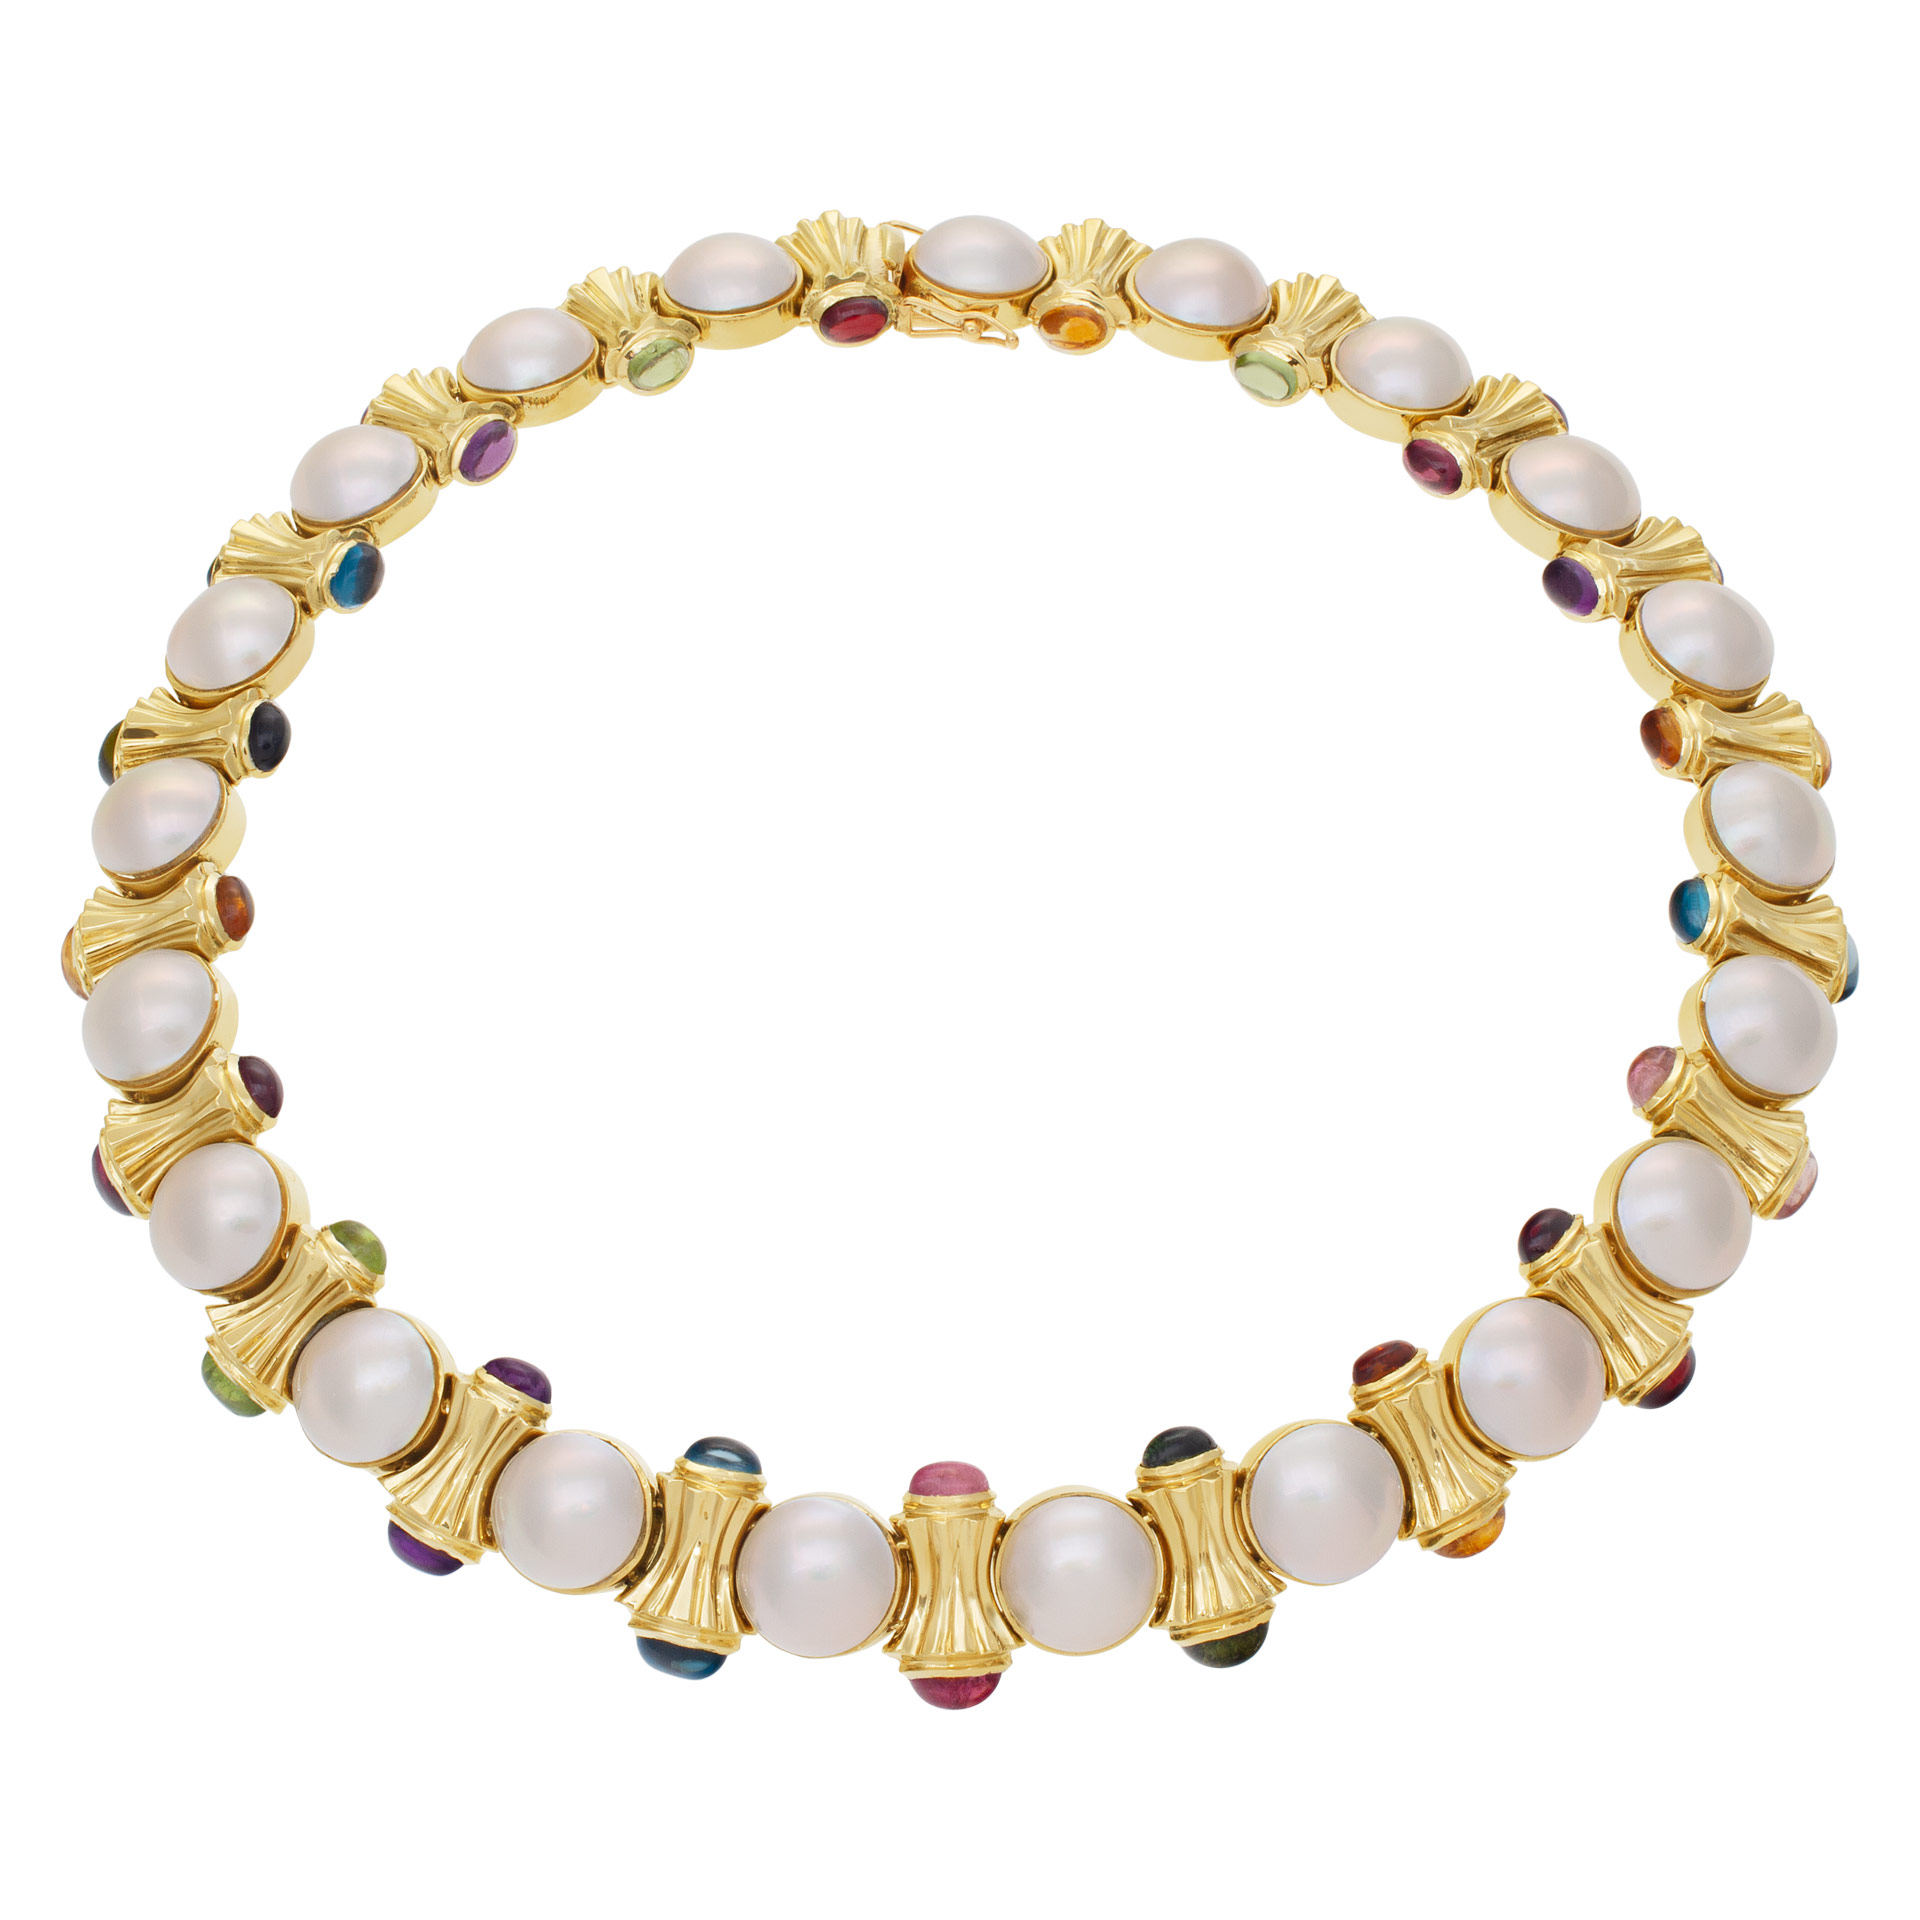 Colorful 14k necklace with 11.5mm Mobe pearls and cabochon stone image 1